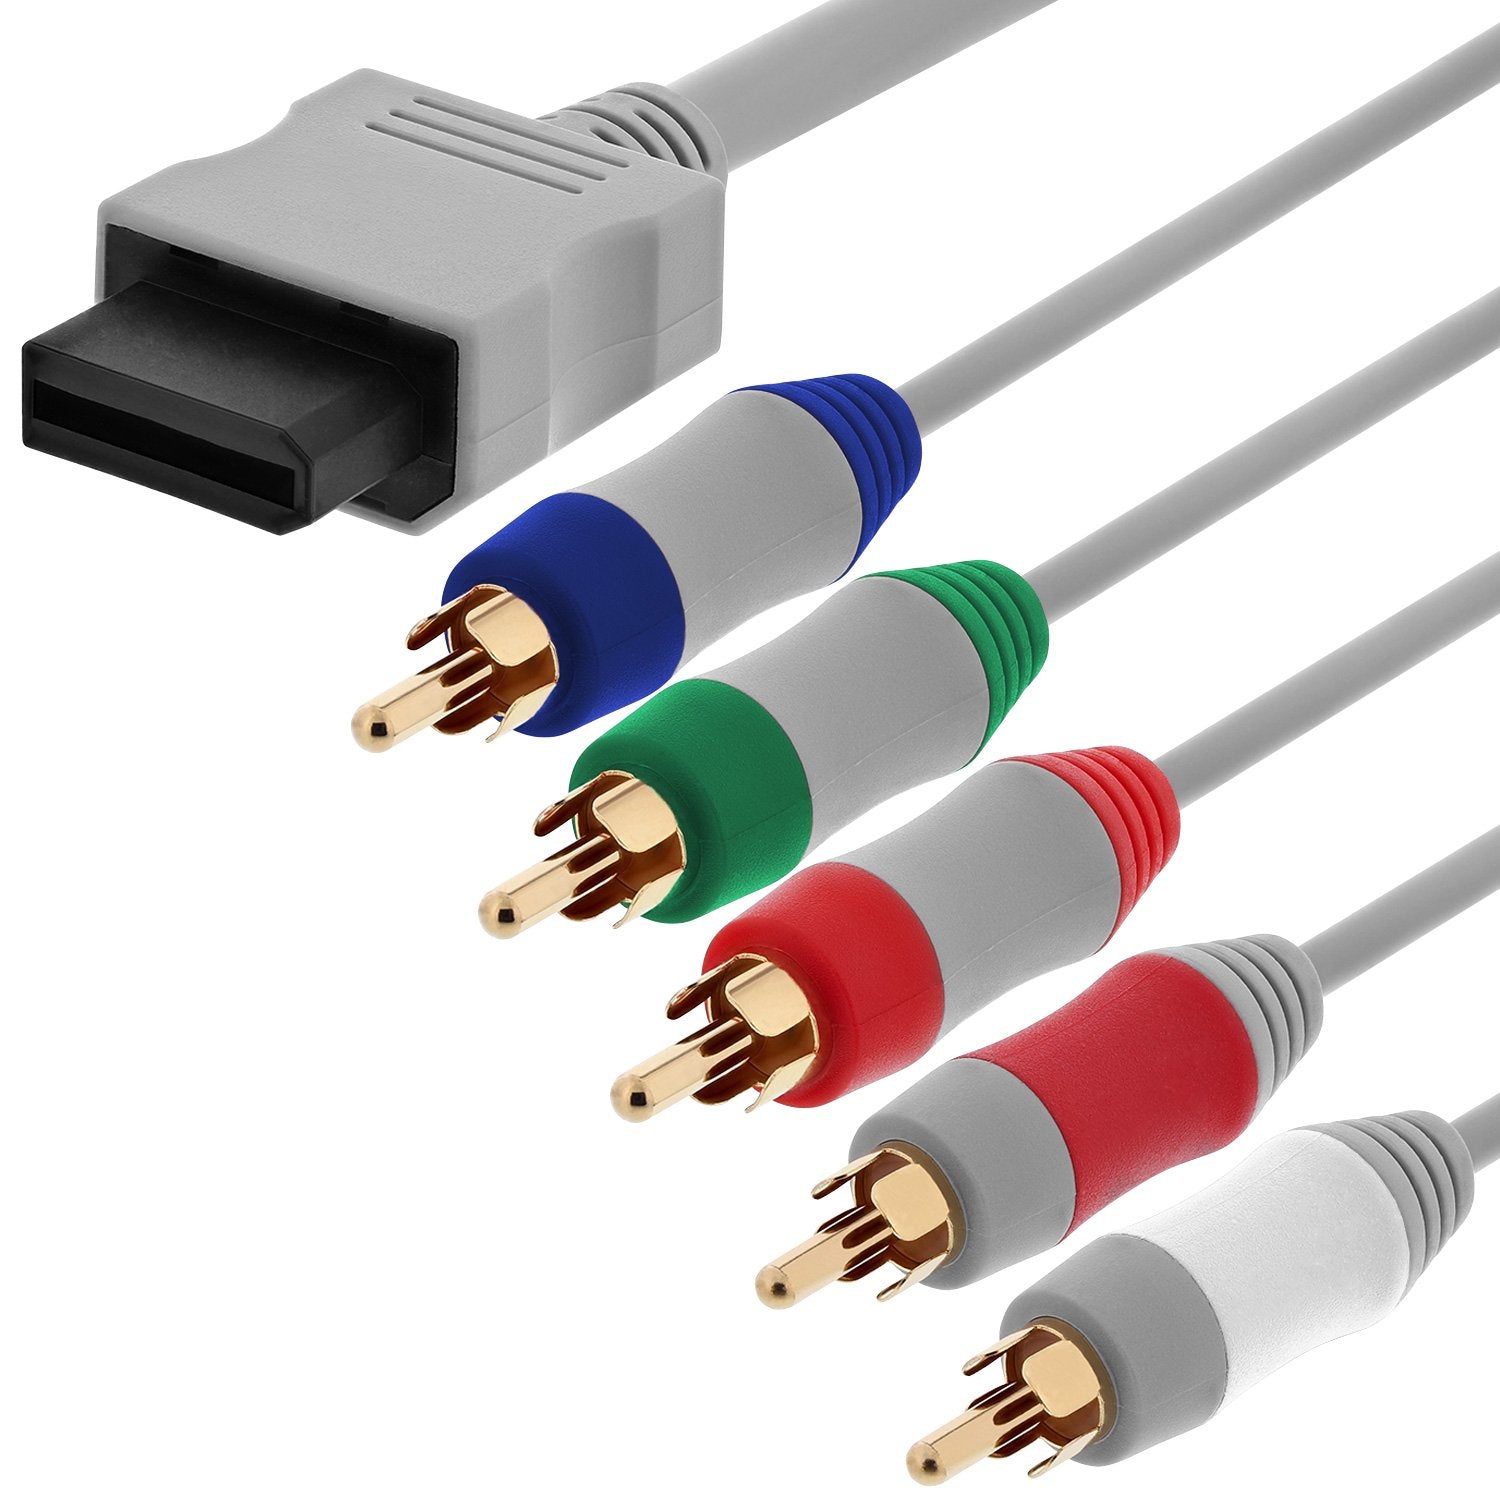 Cable | Nintendo Wii | Component Video Cable